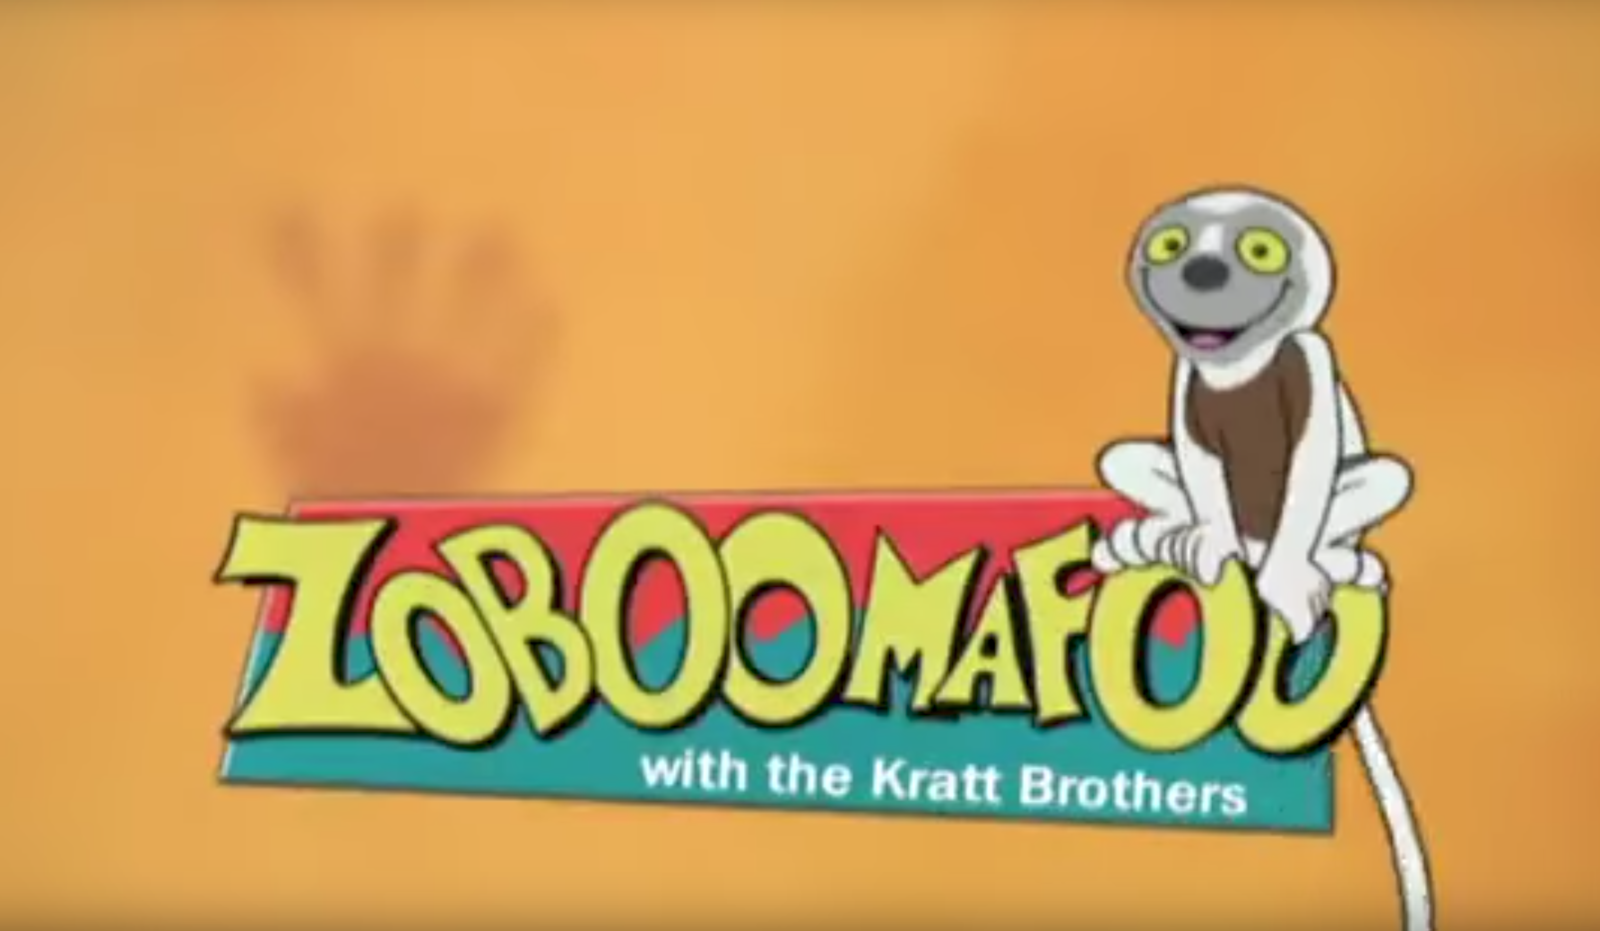 Fondest memory: Seeing Zoboomafoo spin around and turn into the talking lem...